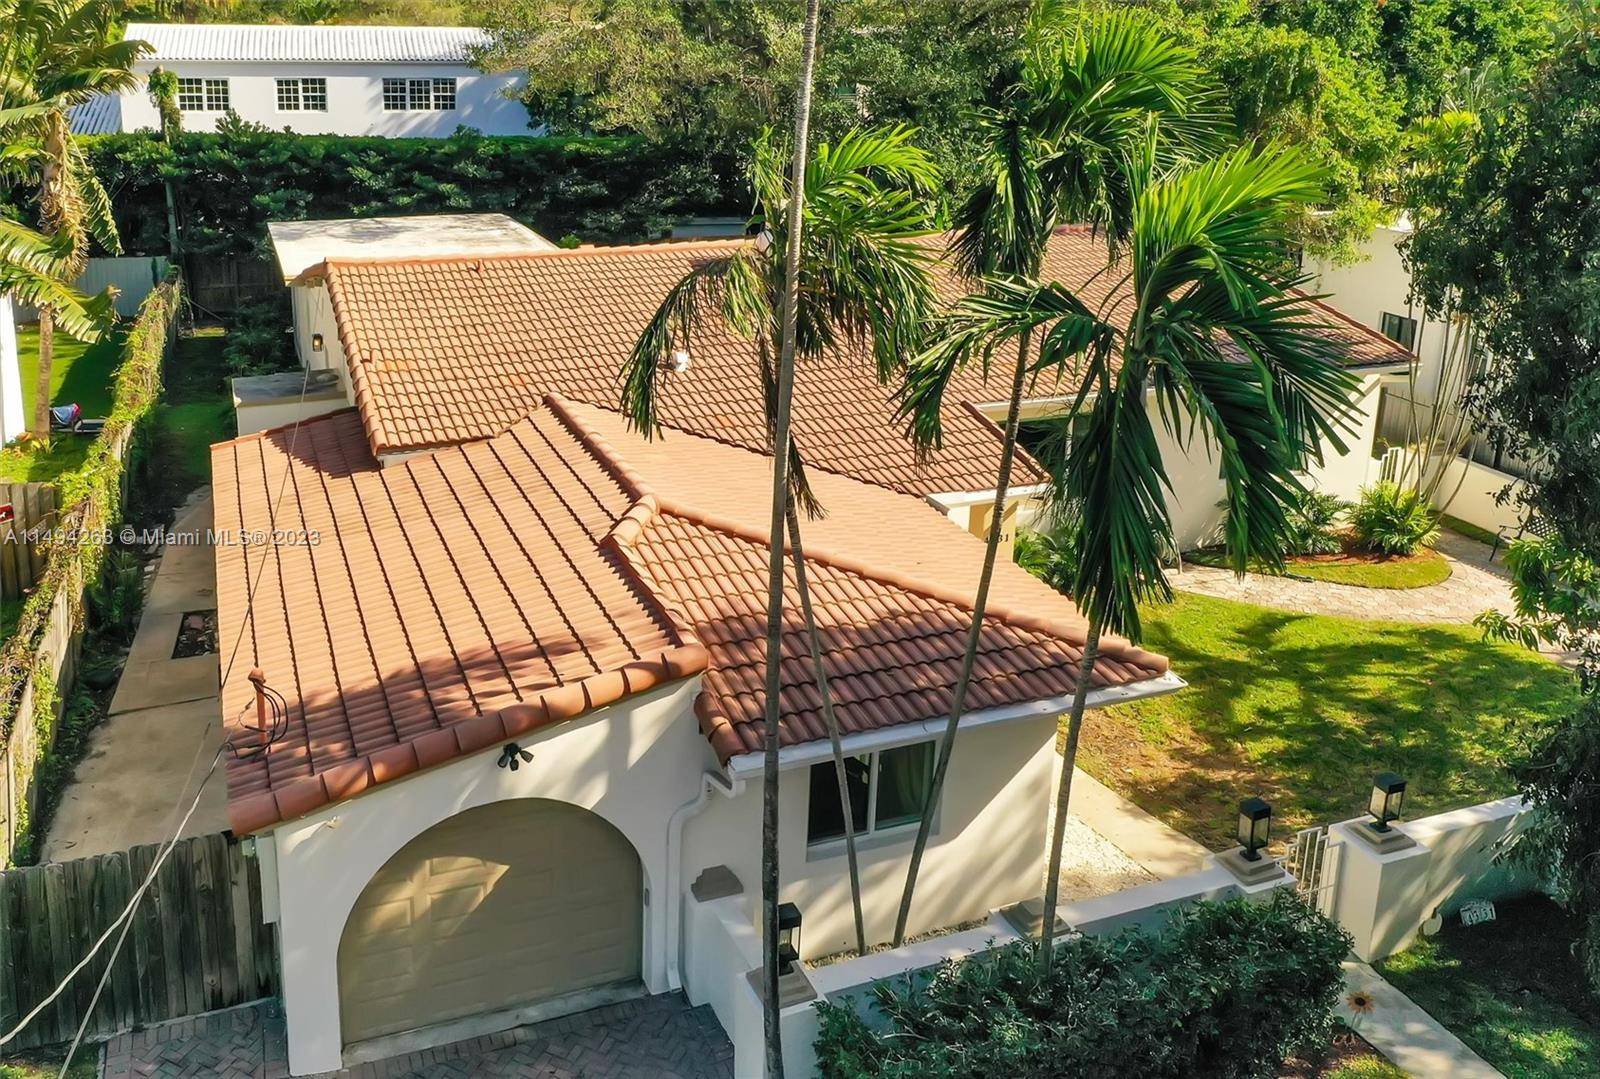 A remarkable opportunity to own a Spanish style single family residence, offered at a competitive price of 804 per sq ft on a generous 9, 175 square foot lot.